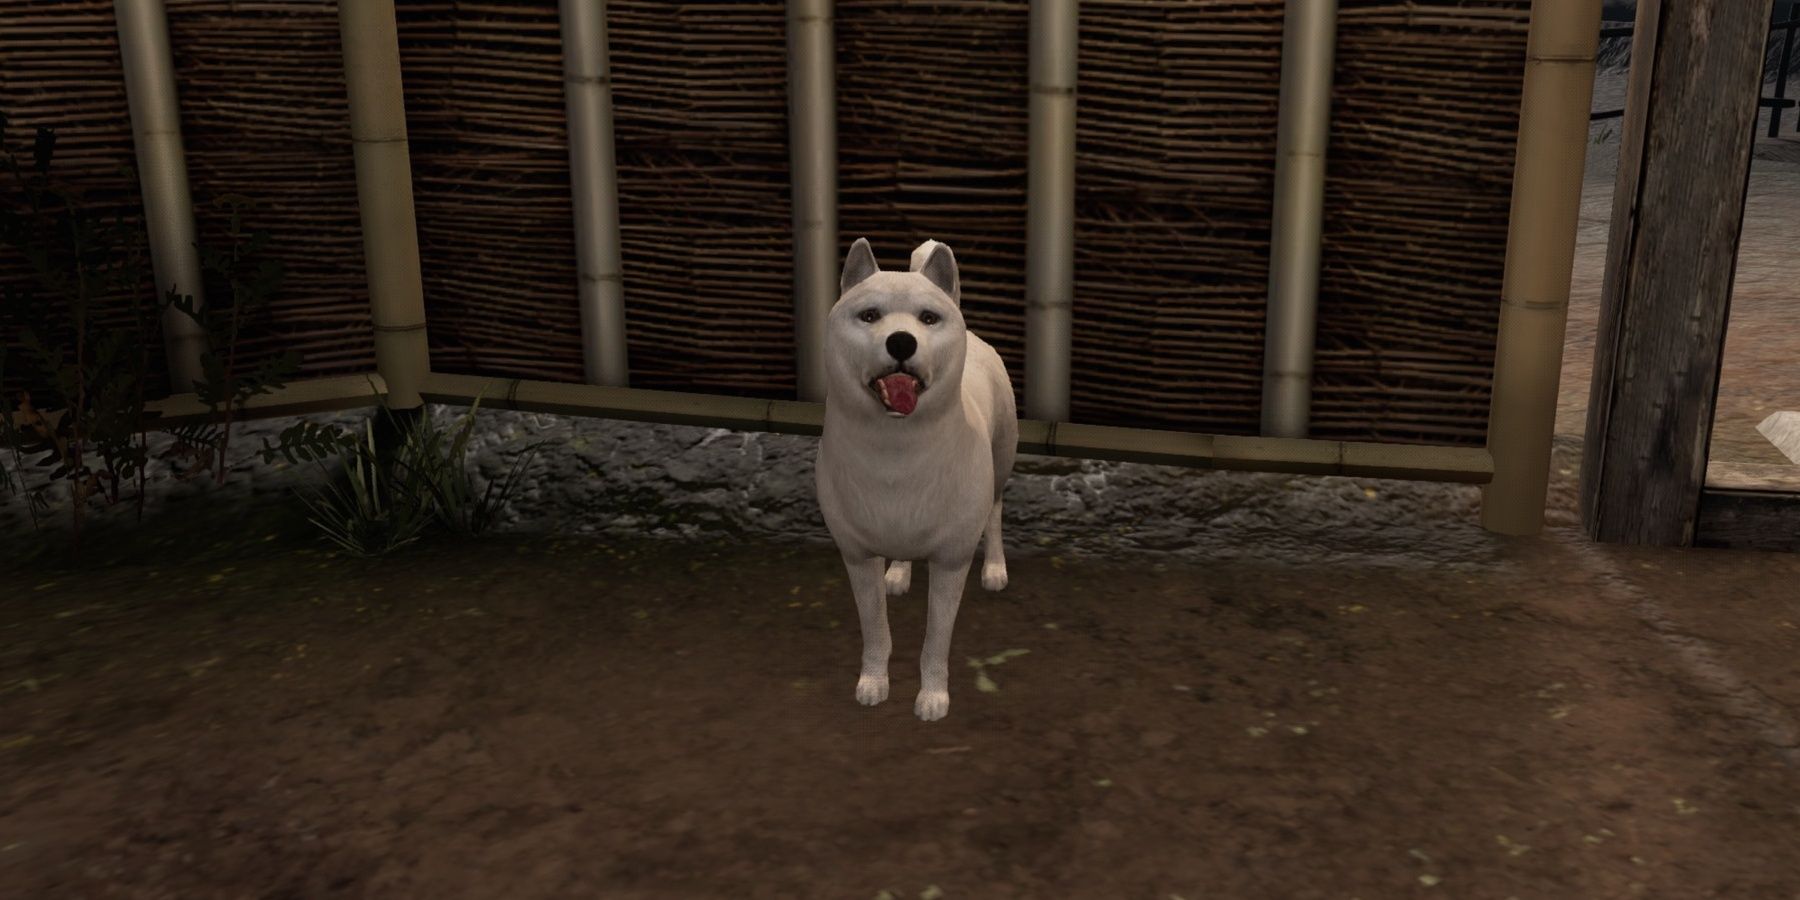 The Injured Dog pants happily with its tongue out while sitting near the fence at Ryoma's home.